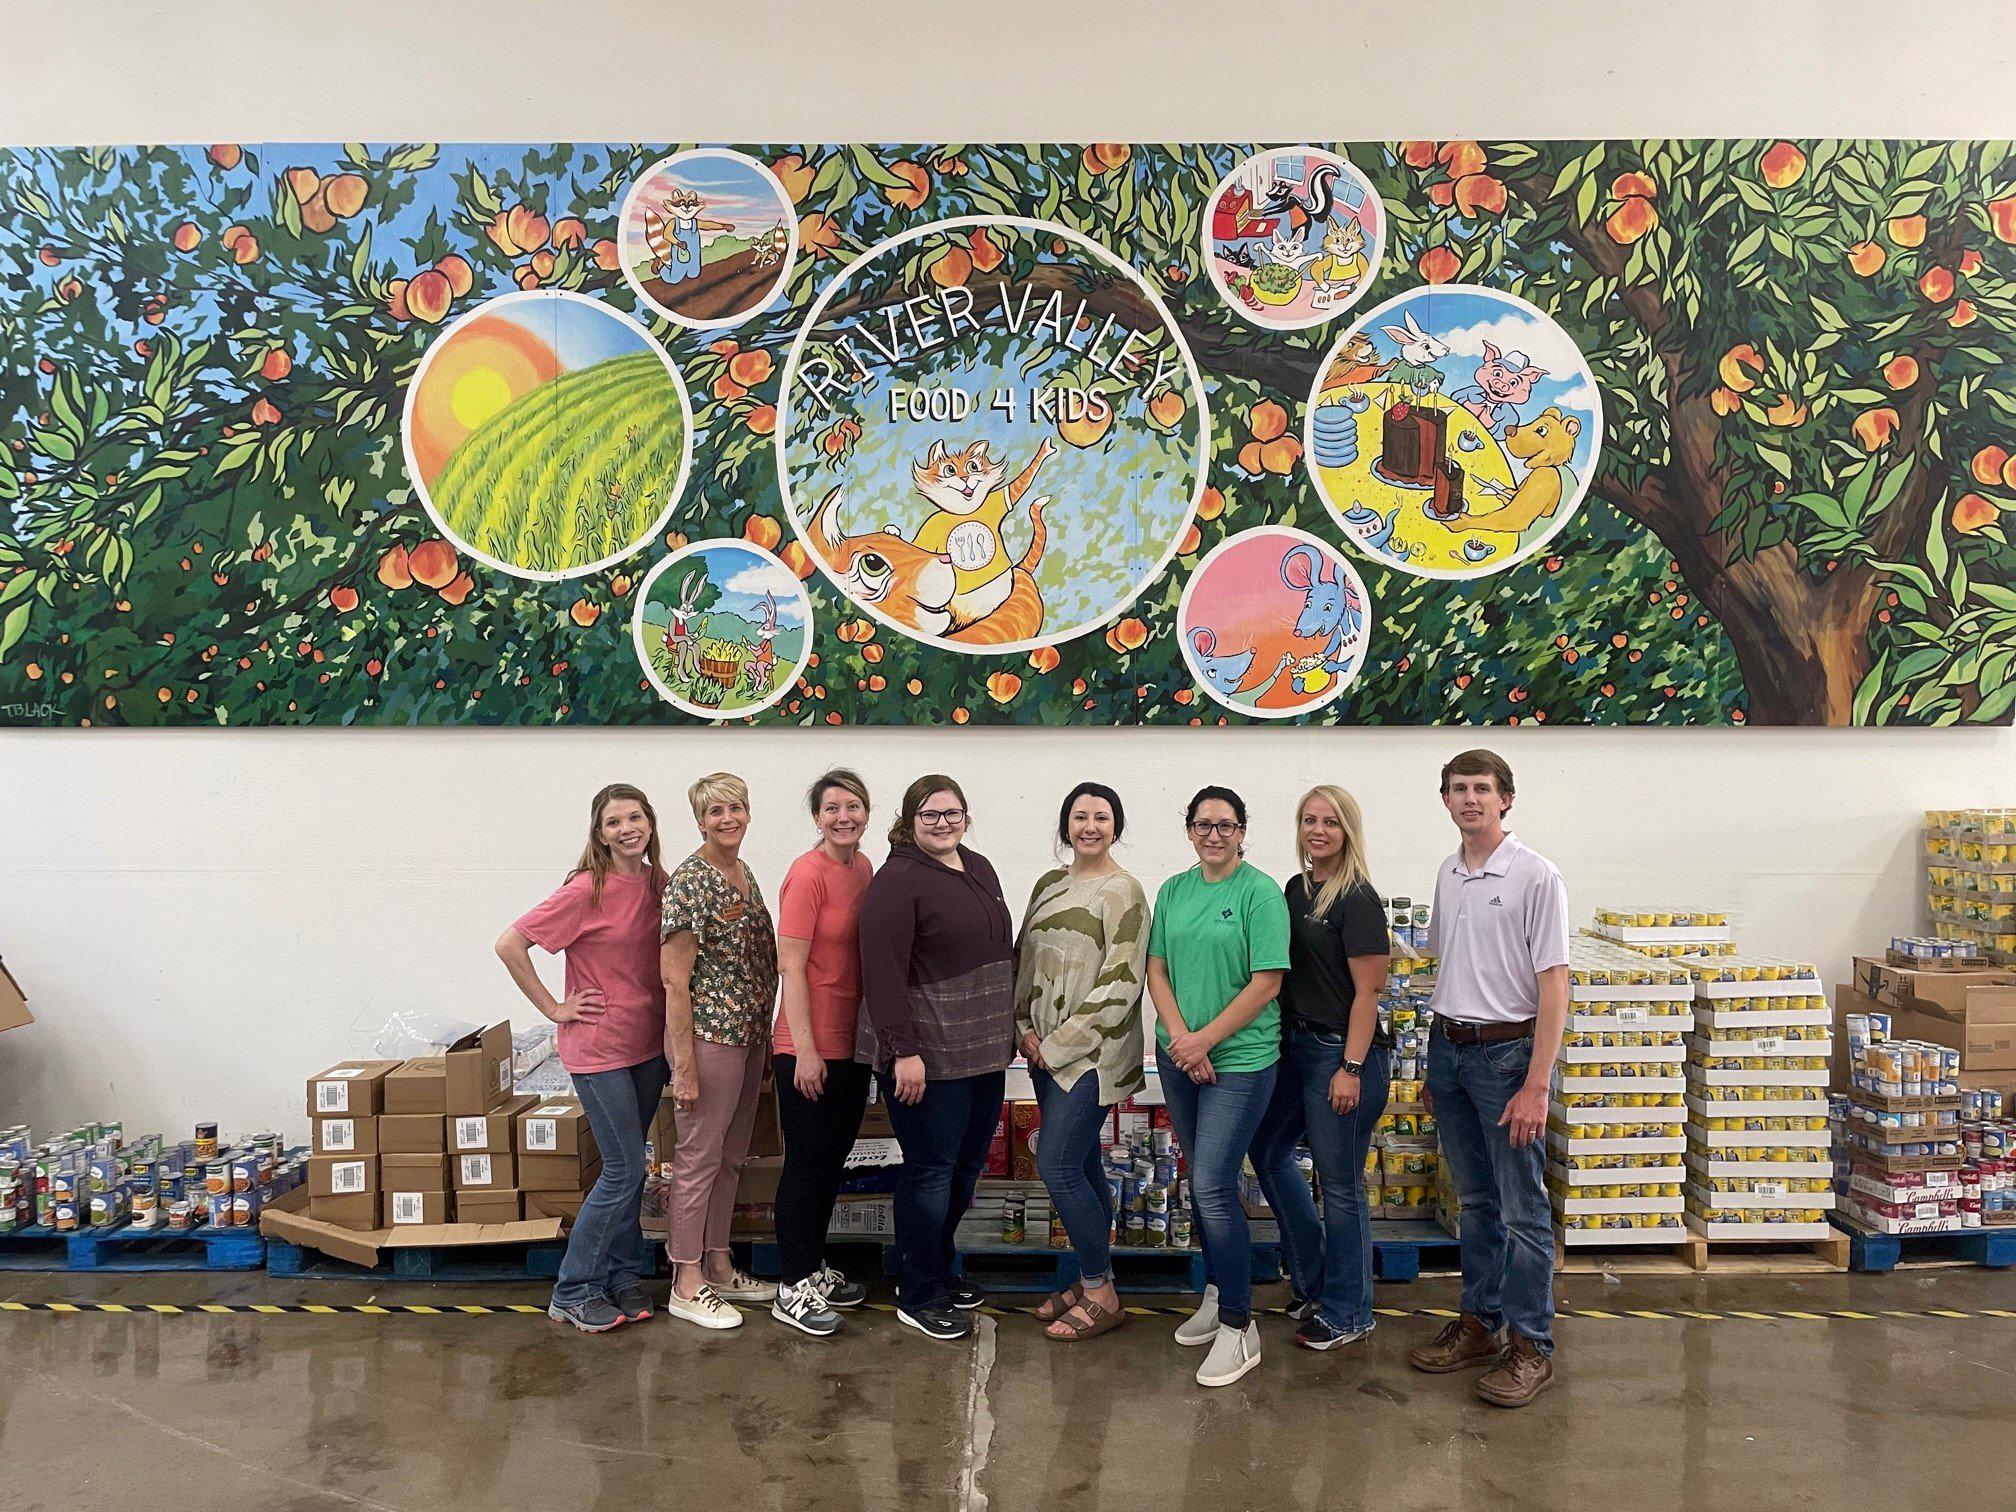 Our employee engagement group, Spark, recently visited River Valley Food 4 Kids! They donated food gathered by employees across our territory and volunteered in the warehouse. 